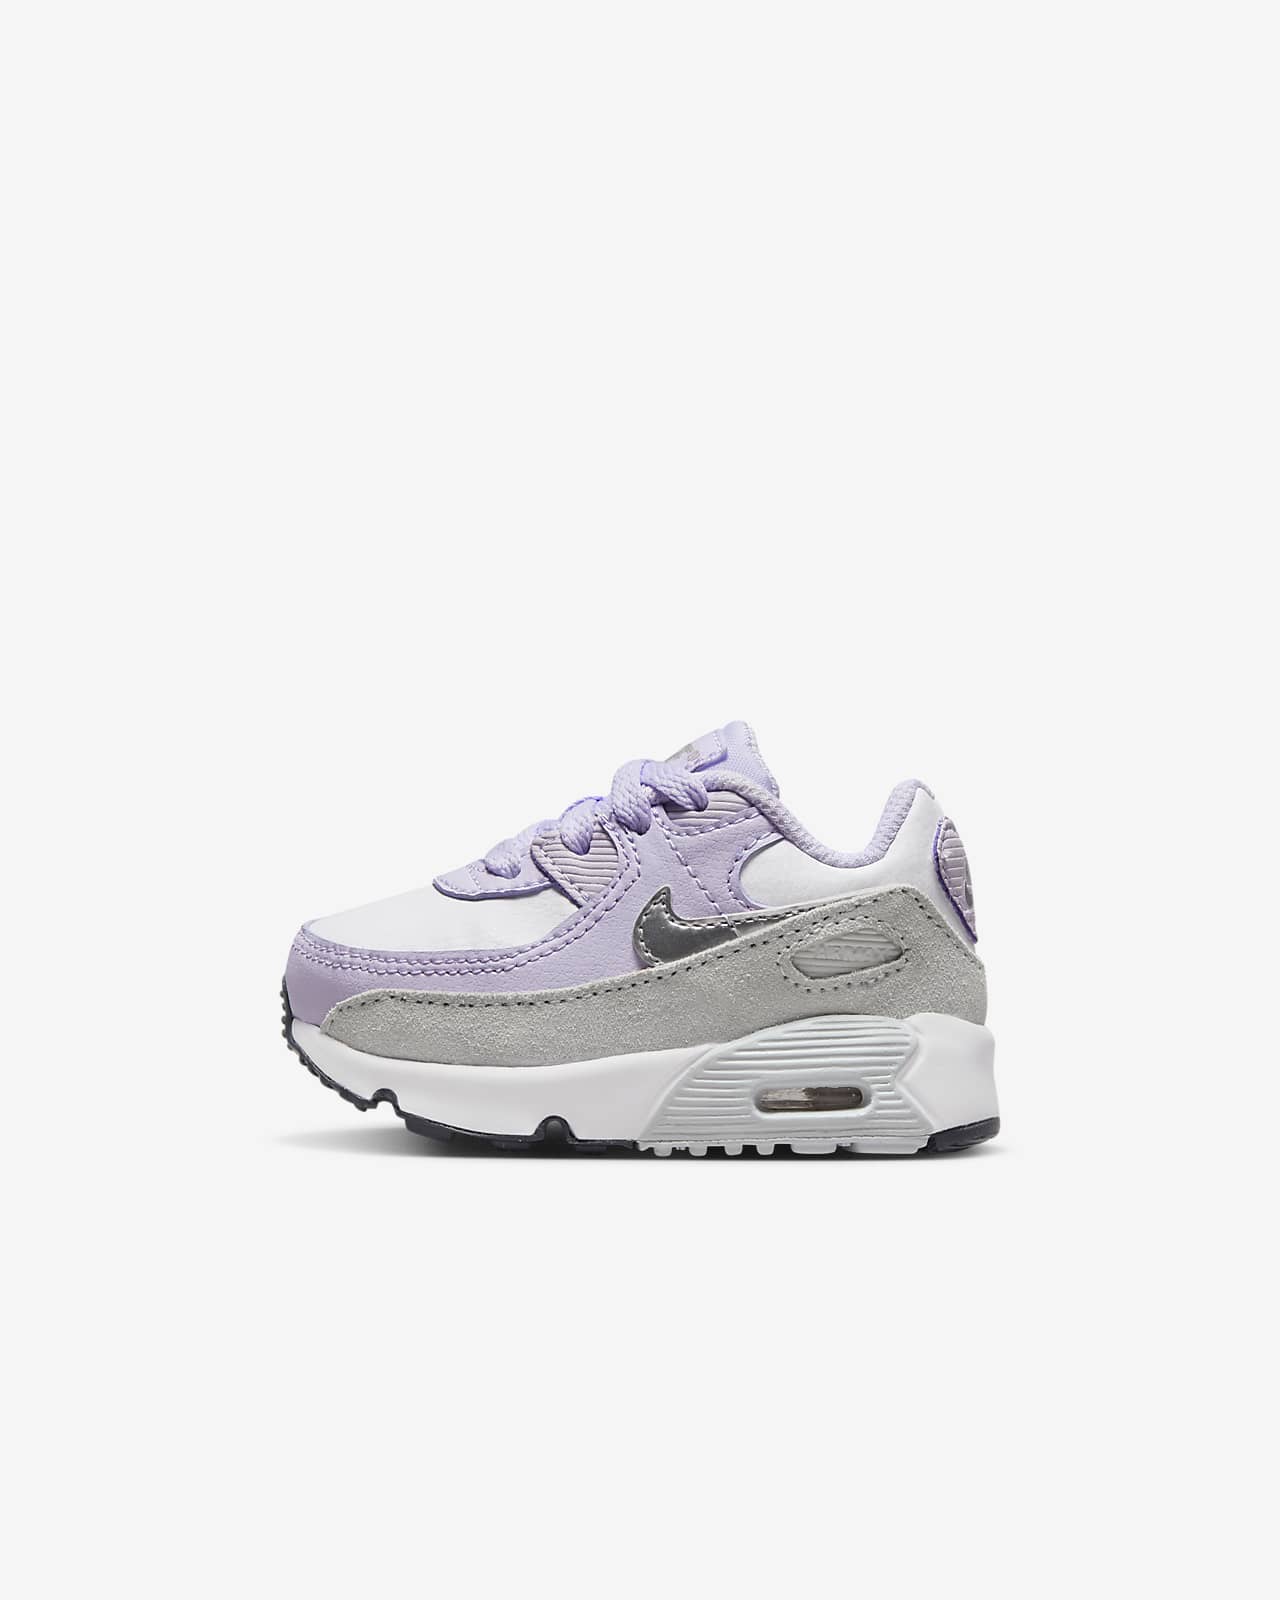 Nike Air Max 90 LTR Baby/Toddler Shoes